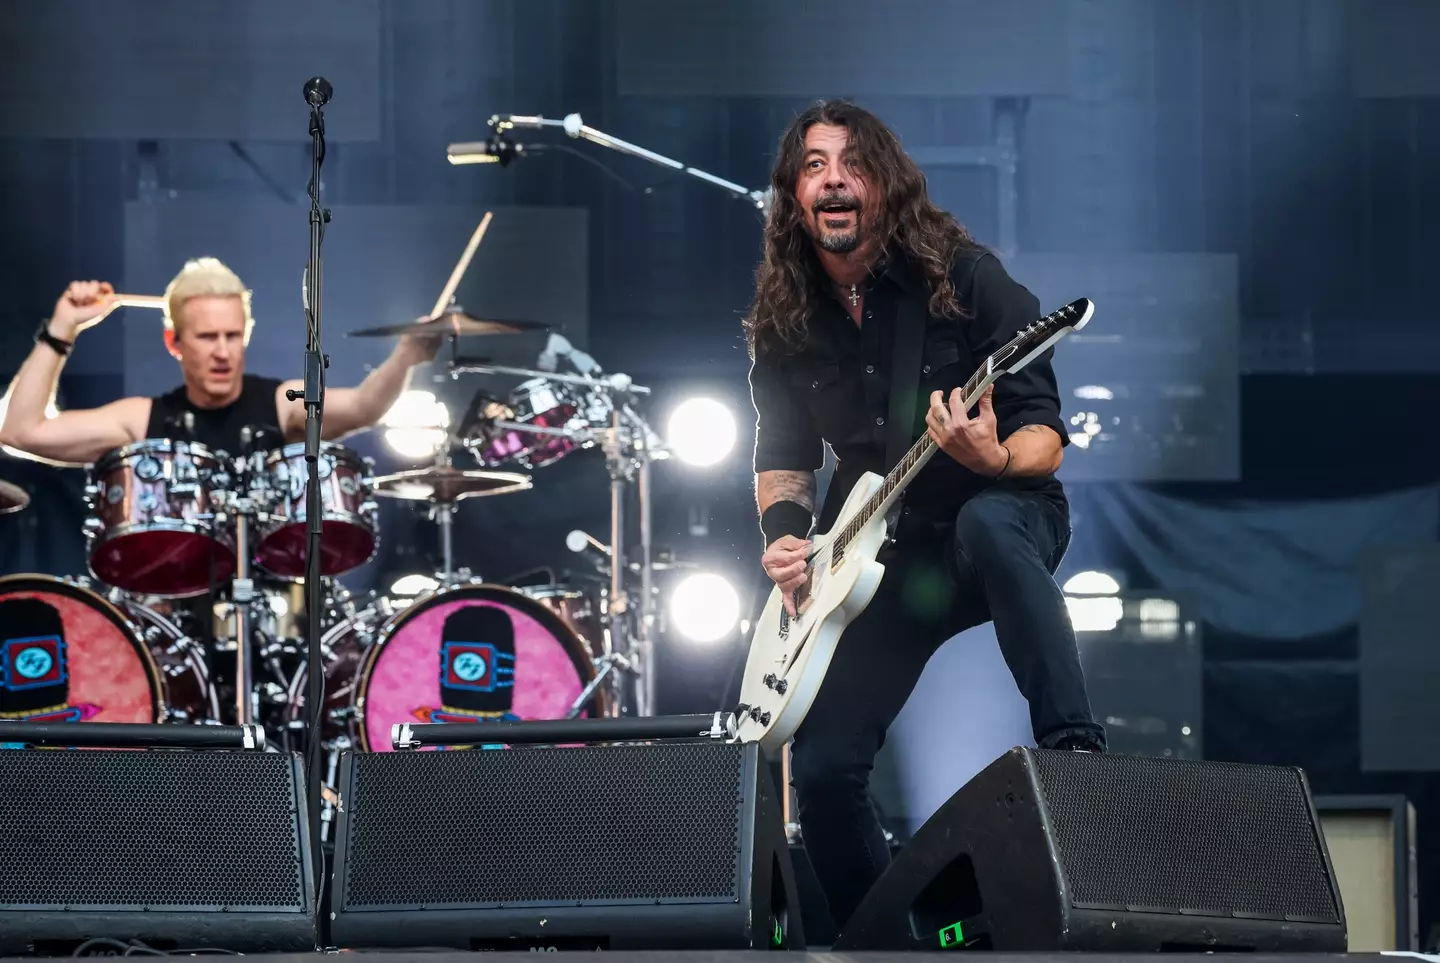 Dave Grohl performing on stage at London Stadium on 20 June (Kevin Mazur/Getty Images for Foo Fighters)